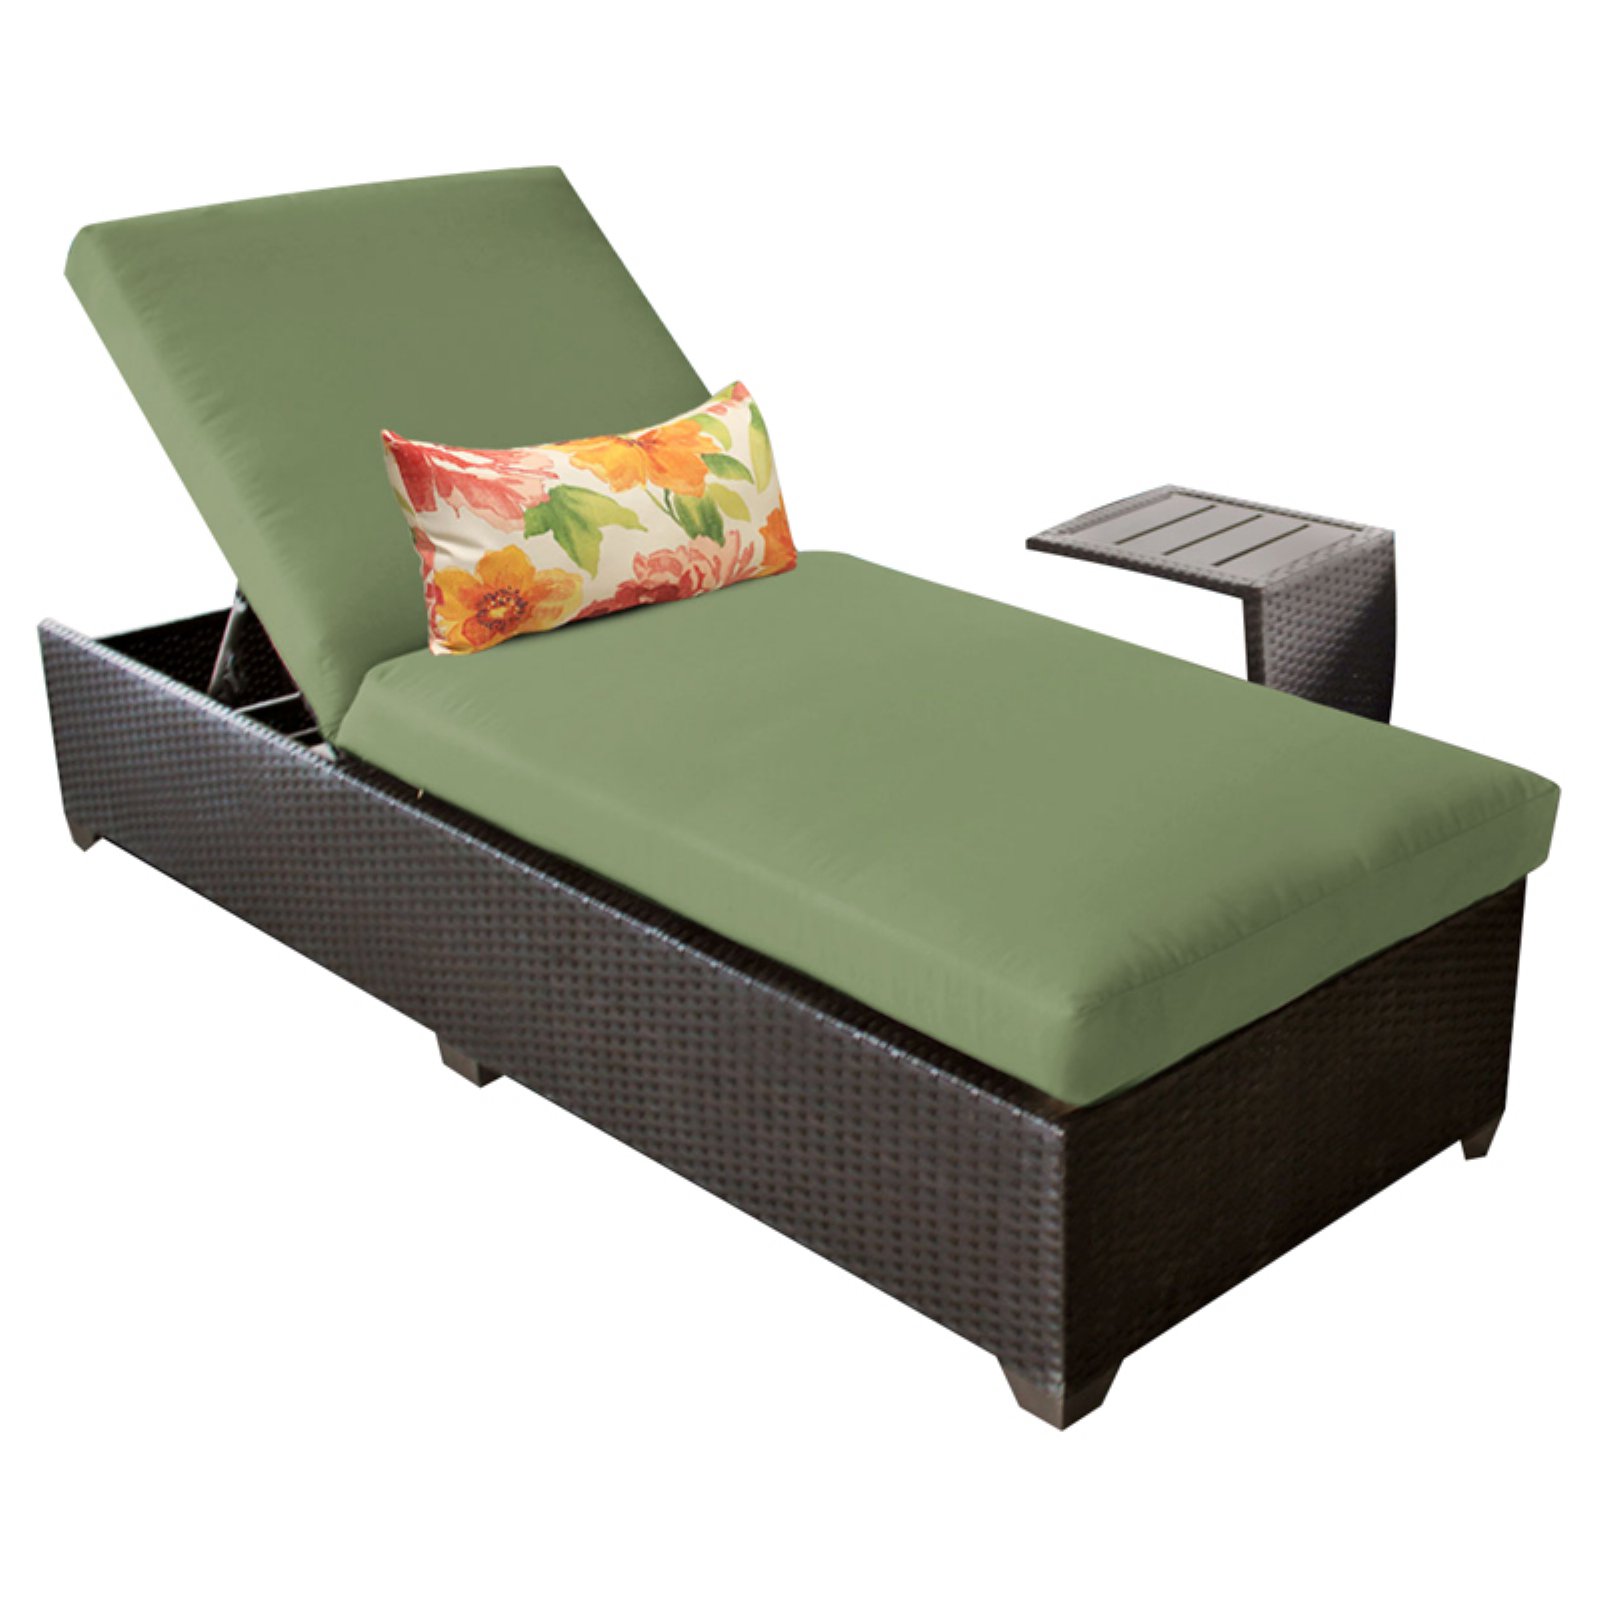 Barbados Chaise Outdoor Wicker Patio Furniture with Side Table in Cilantro - image 1 of 10